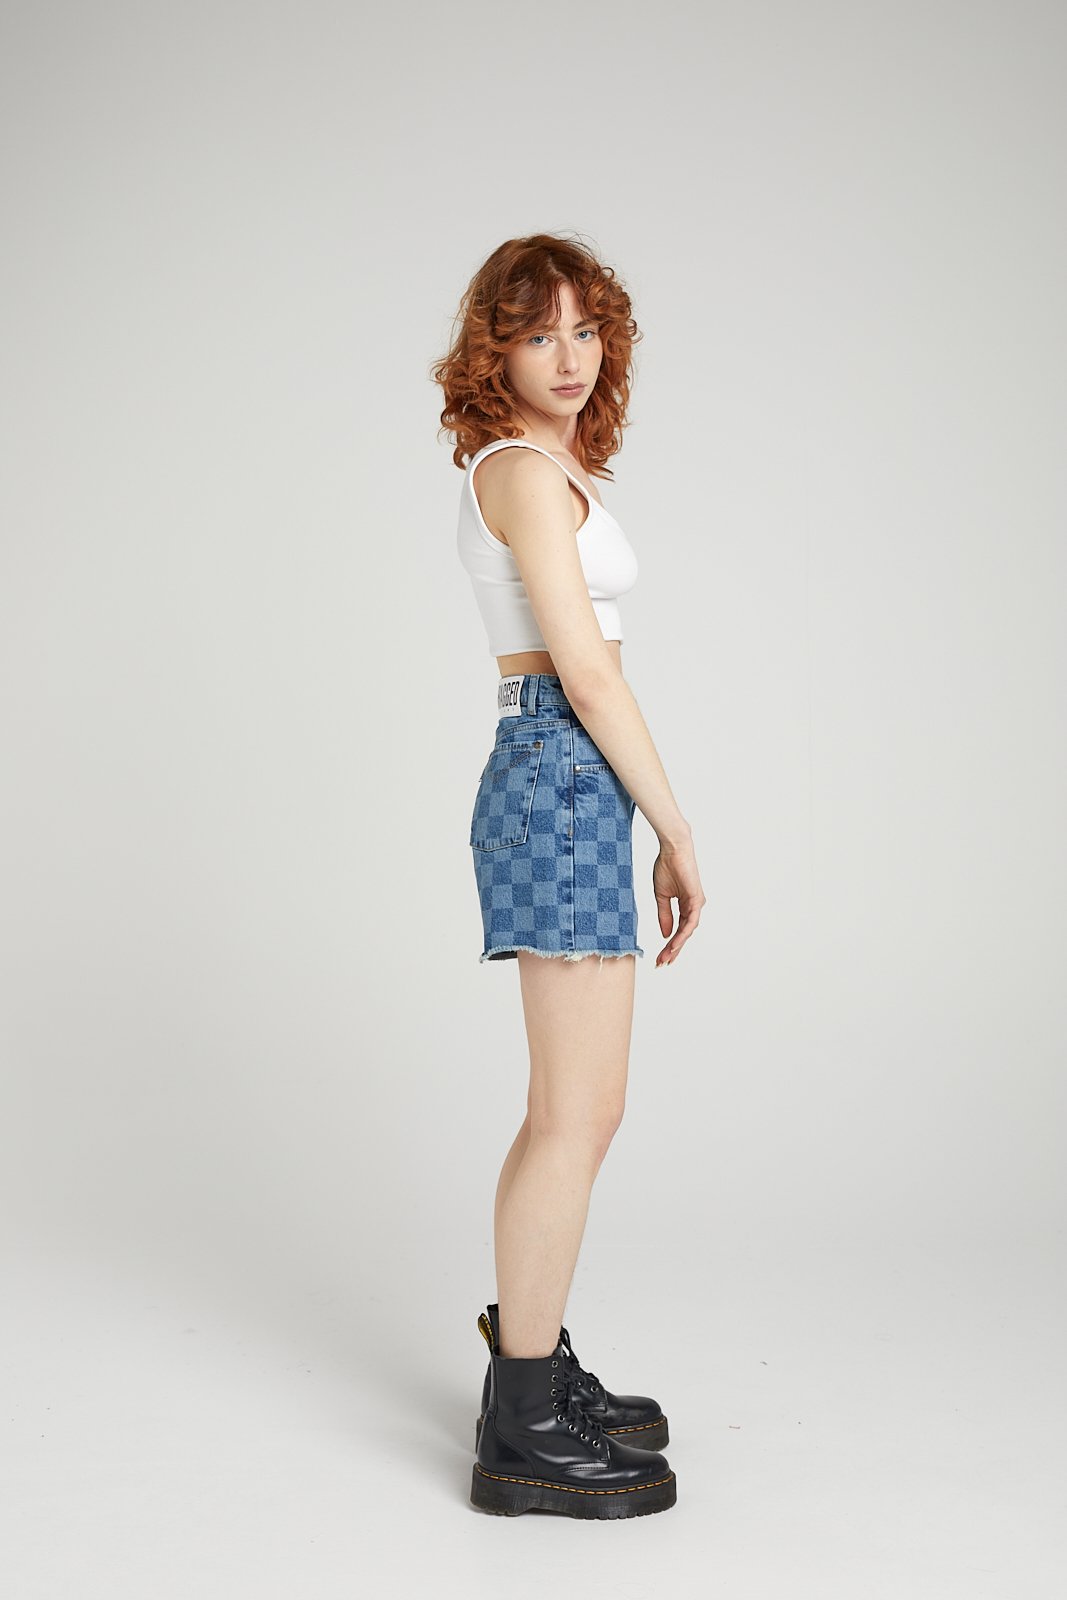 RAVE DENIM SHORTS - JEANIOUS BLUE - EXCLUSIVE Denim from THE RAGGED PRIEST - Just $51.00! SHOP NOW AT IAMINHATELOVE BOTH IN STORE FOR CYPRUS AND ONLINE WORLDWIDE